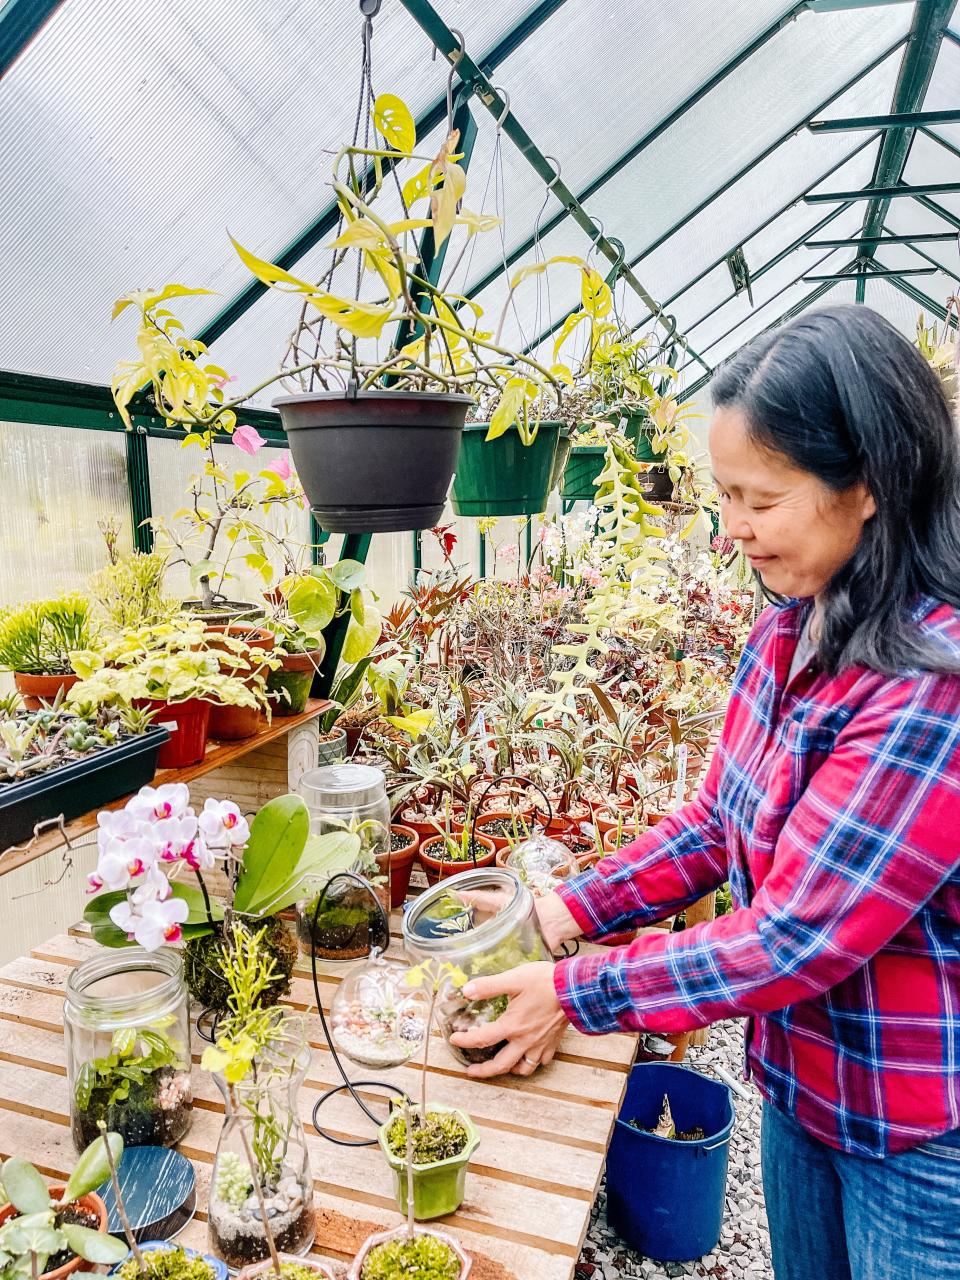 “We create terrariums and Kokedama moss balls with our hands. I don’t think there is a local market that sells those things in their storefront regularly,” said Terumi Watson, co-owner of Plant Curators. Fountain City, April 12, 2022.